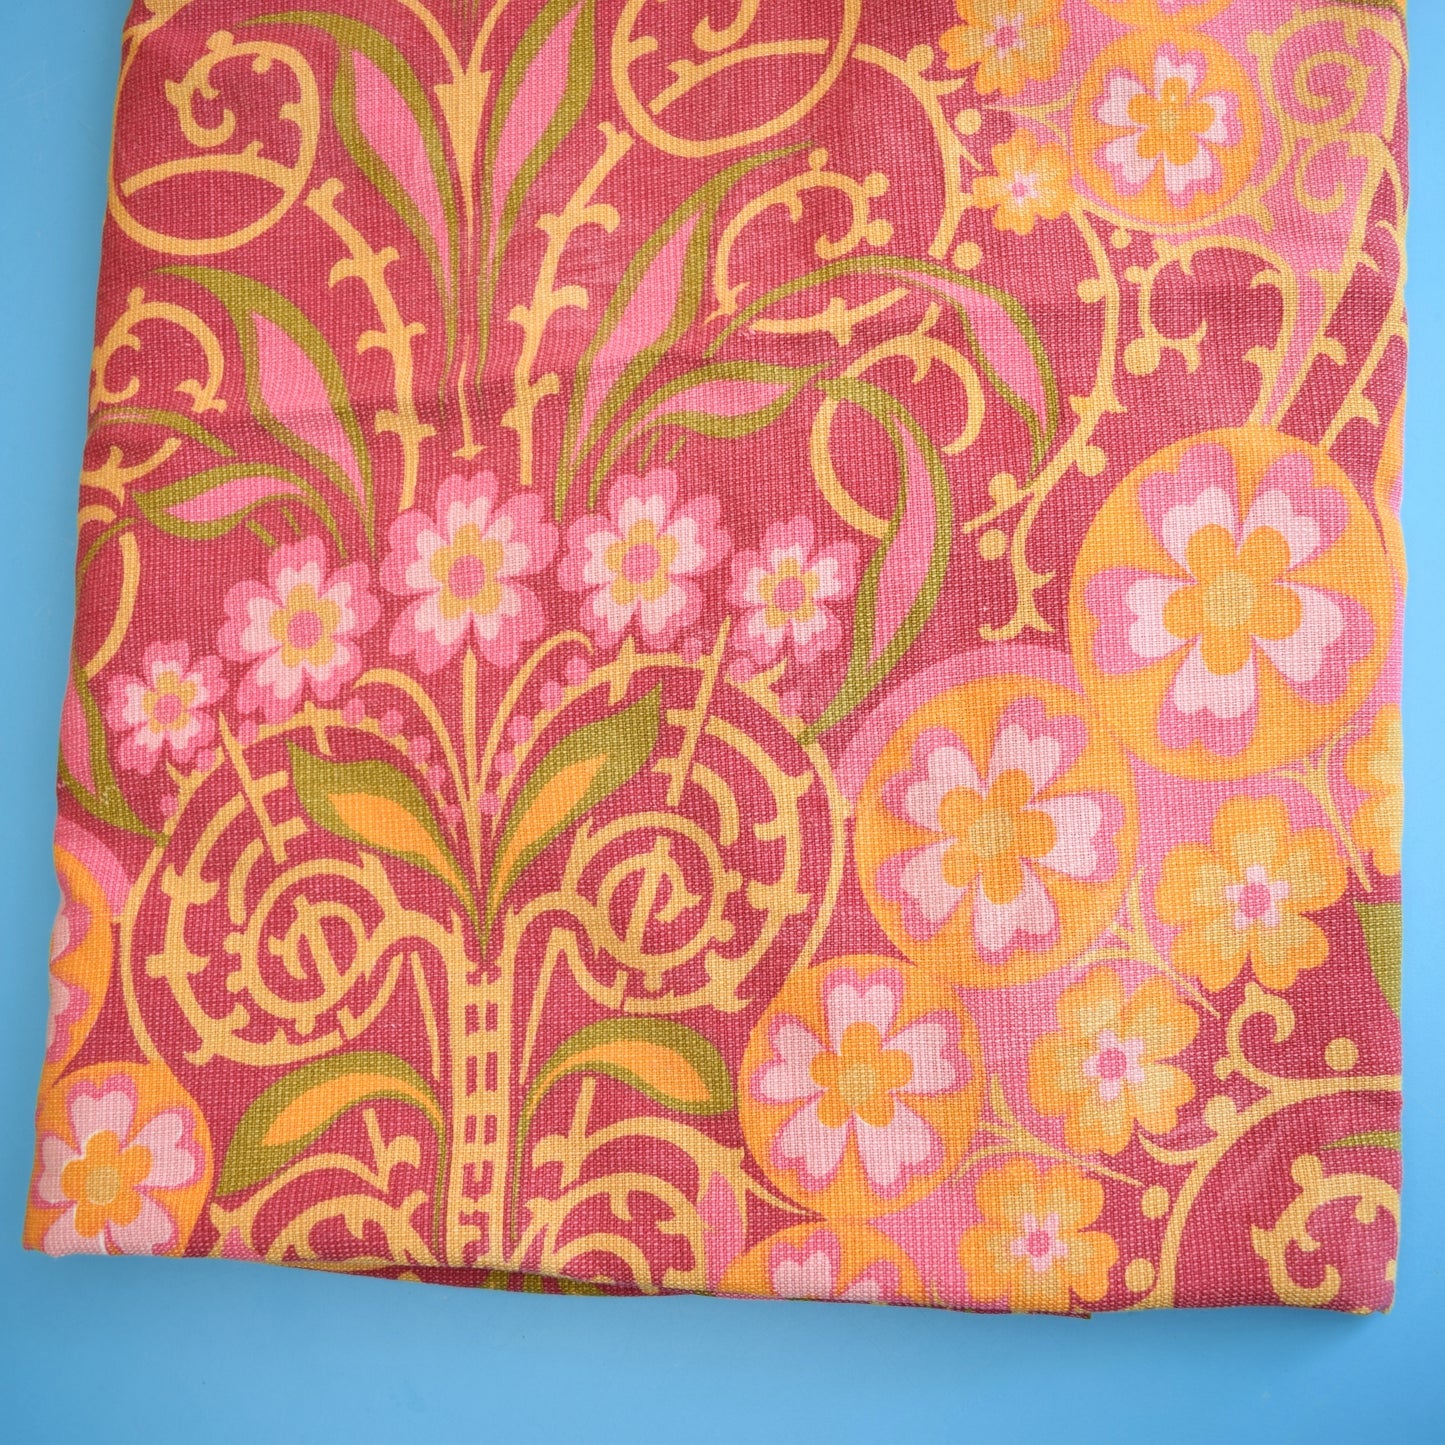 Vintage 1960s Bed Cover - M&S - Flower Power - Pink